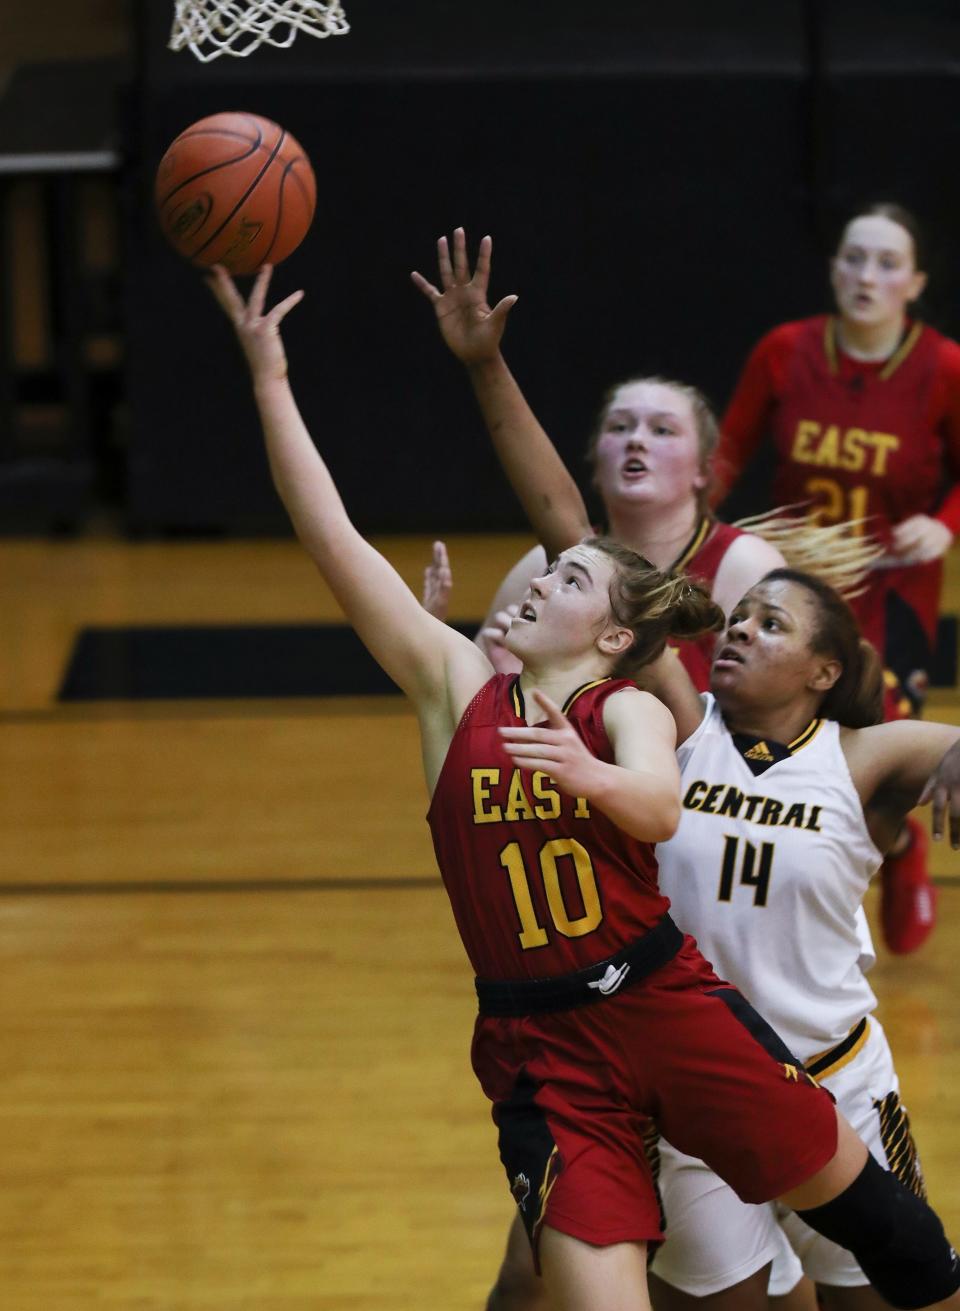 Bullitt East's Emma Egan (10) beats Central's Briontanay Marshall (14) to the basket during their game at the Central High School in Louisville, Ky. on Jan. 11, 2022.  Bullitt East won 63-52.